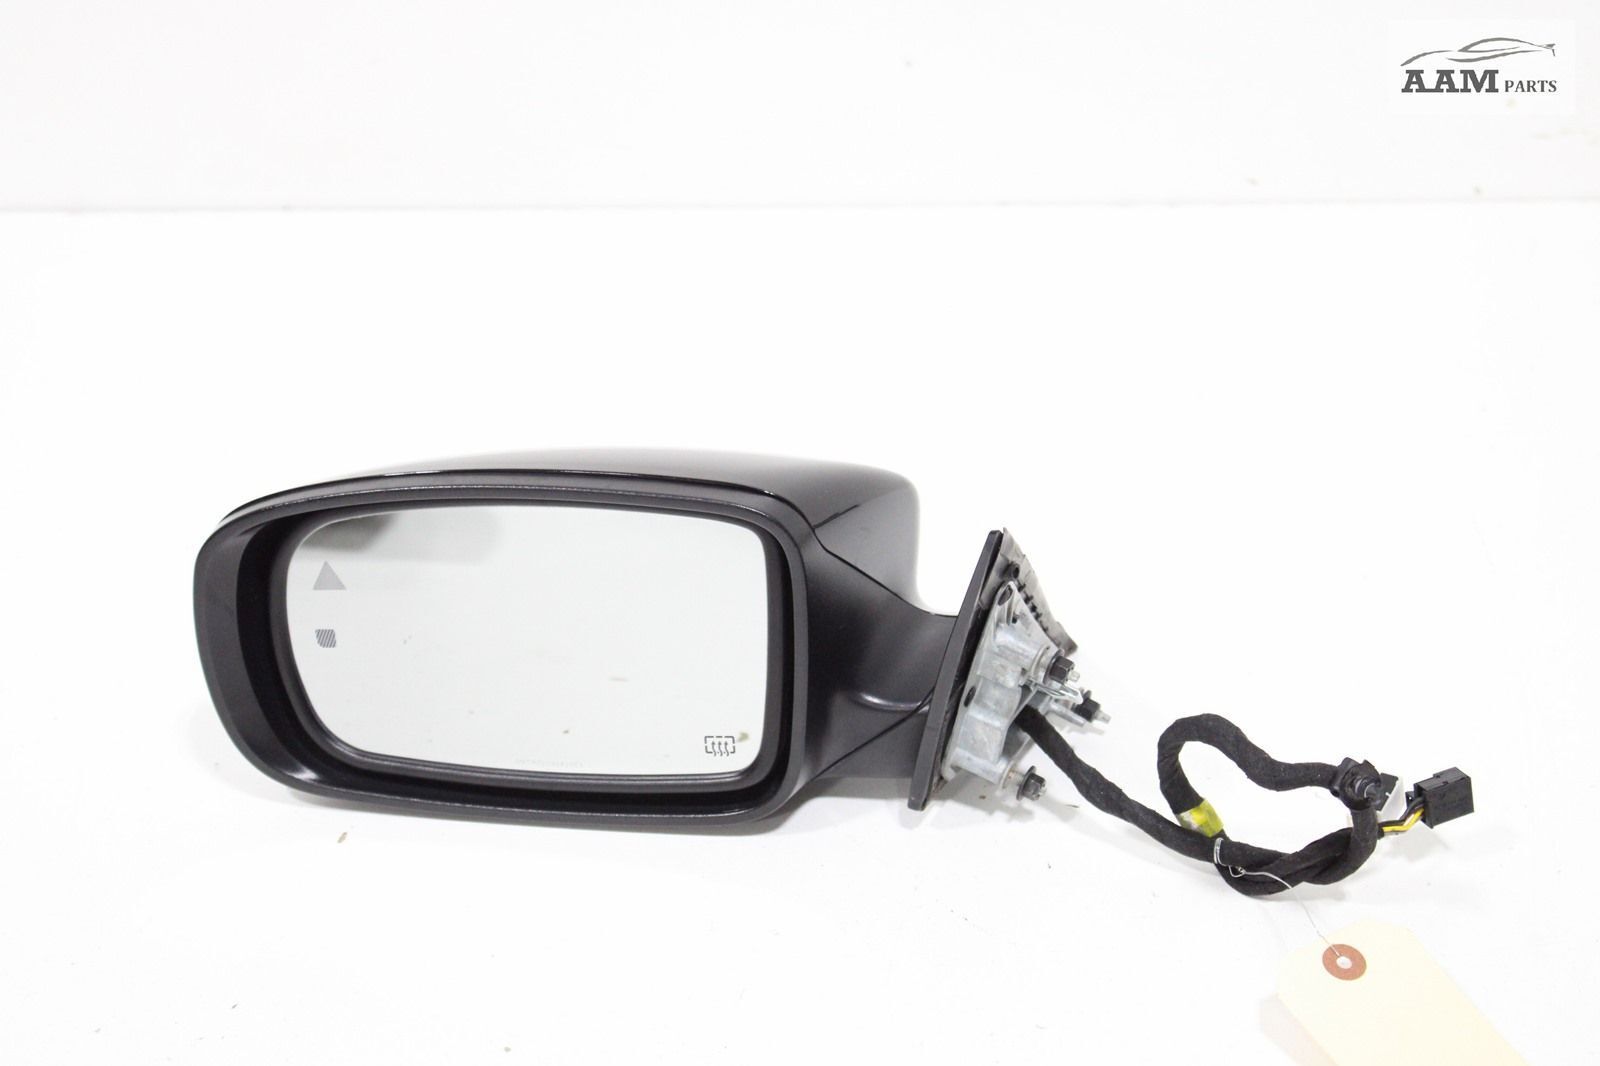 2018 DODGE CHARGER FRONT LEFT DRIVER SIDE DOOR EXTERIOR REAR VIEW MIRROR OEM